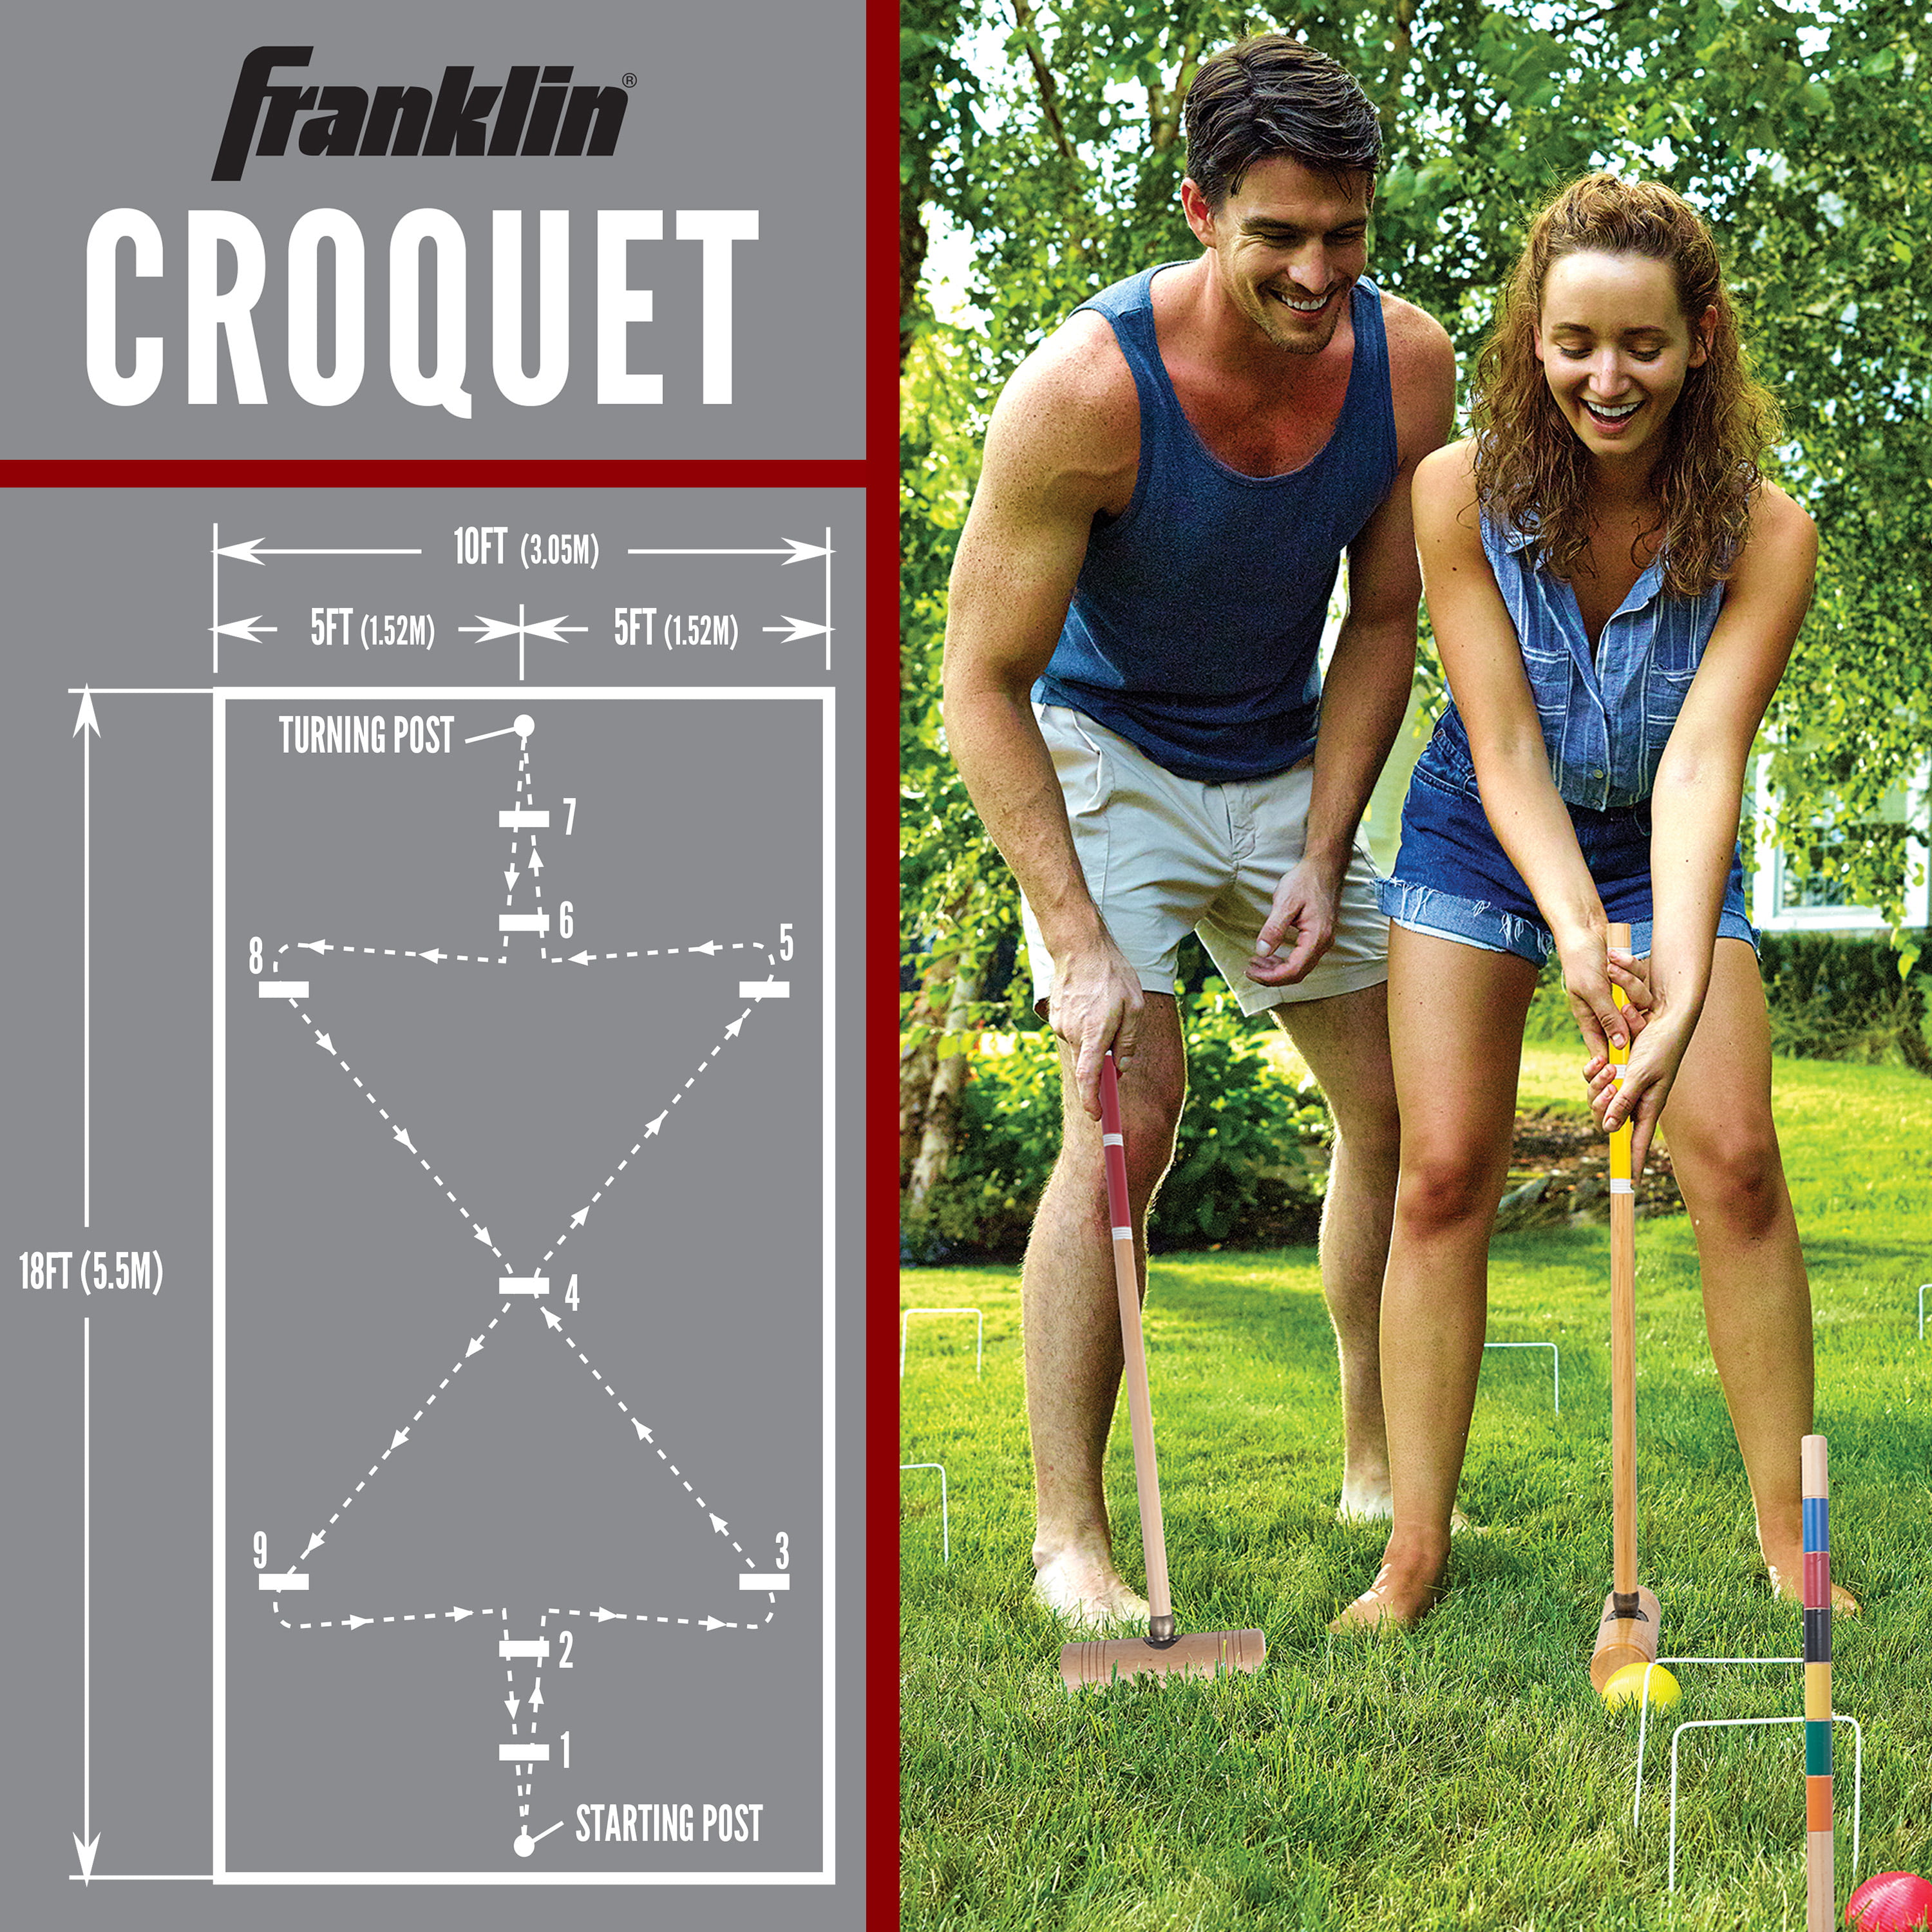 Classic Family Outdoor Sports Game Player Croquet Set for Adults & Kids Includes Croquet Wood Mallets Wood Stakes and Metal Wickets Erwazi Wooden Croquet Set All Weather Balls 